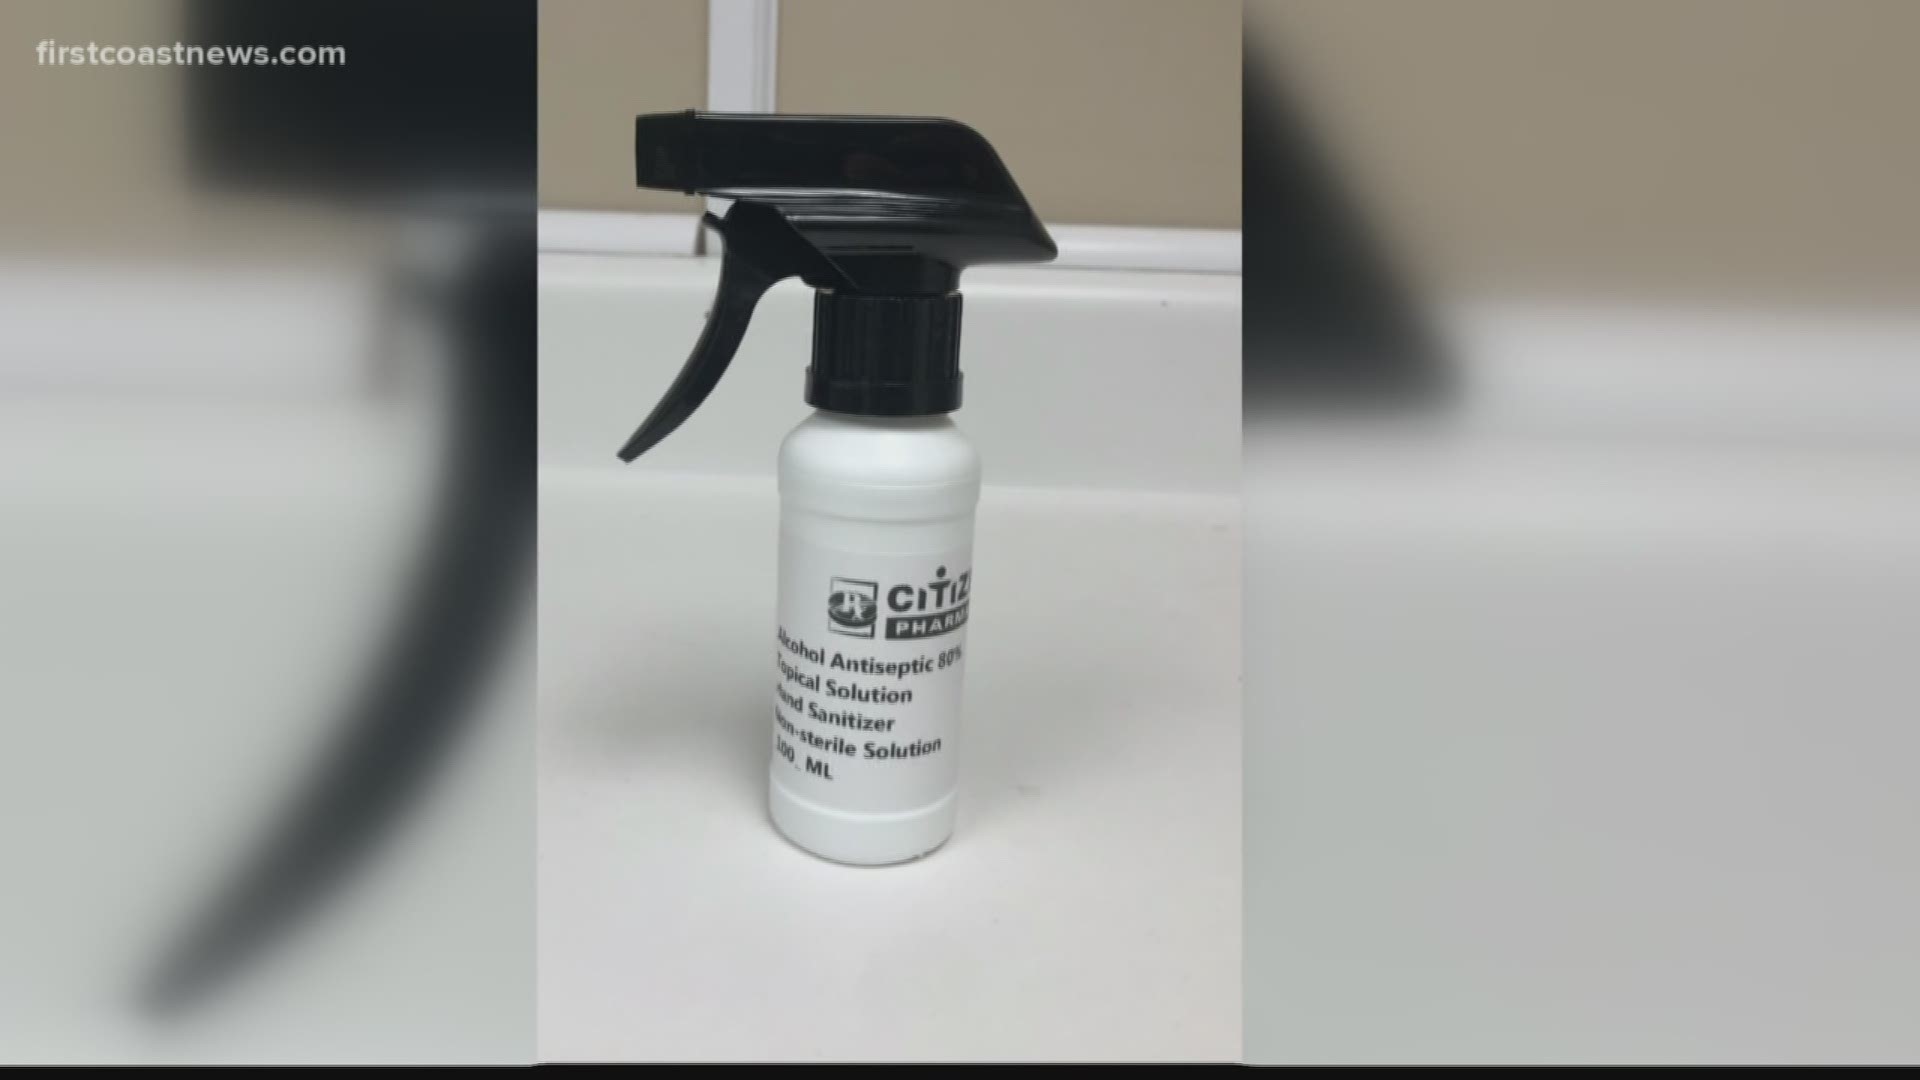 A Jacksonville compounding pharmacy is making and selling its own hand sanitizer to help in the fight against COVID-19.